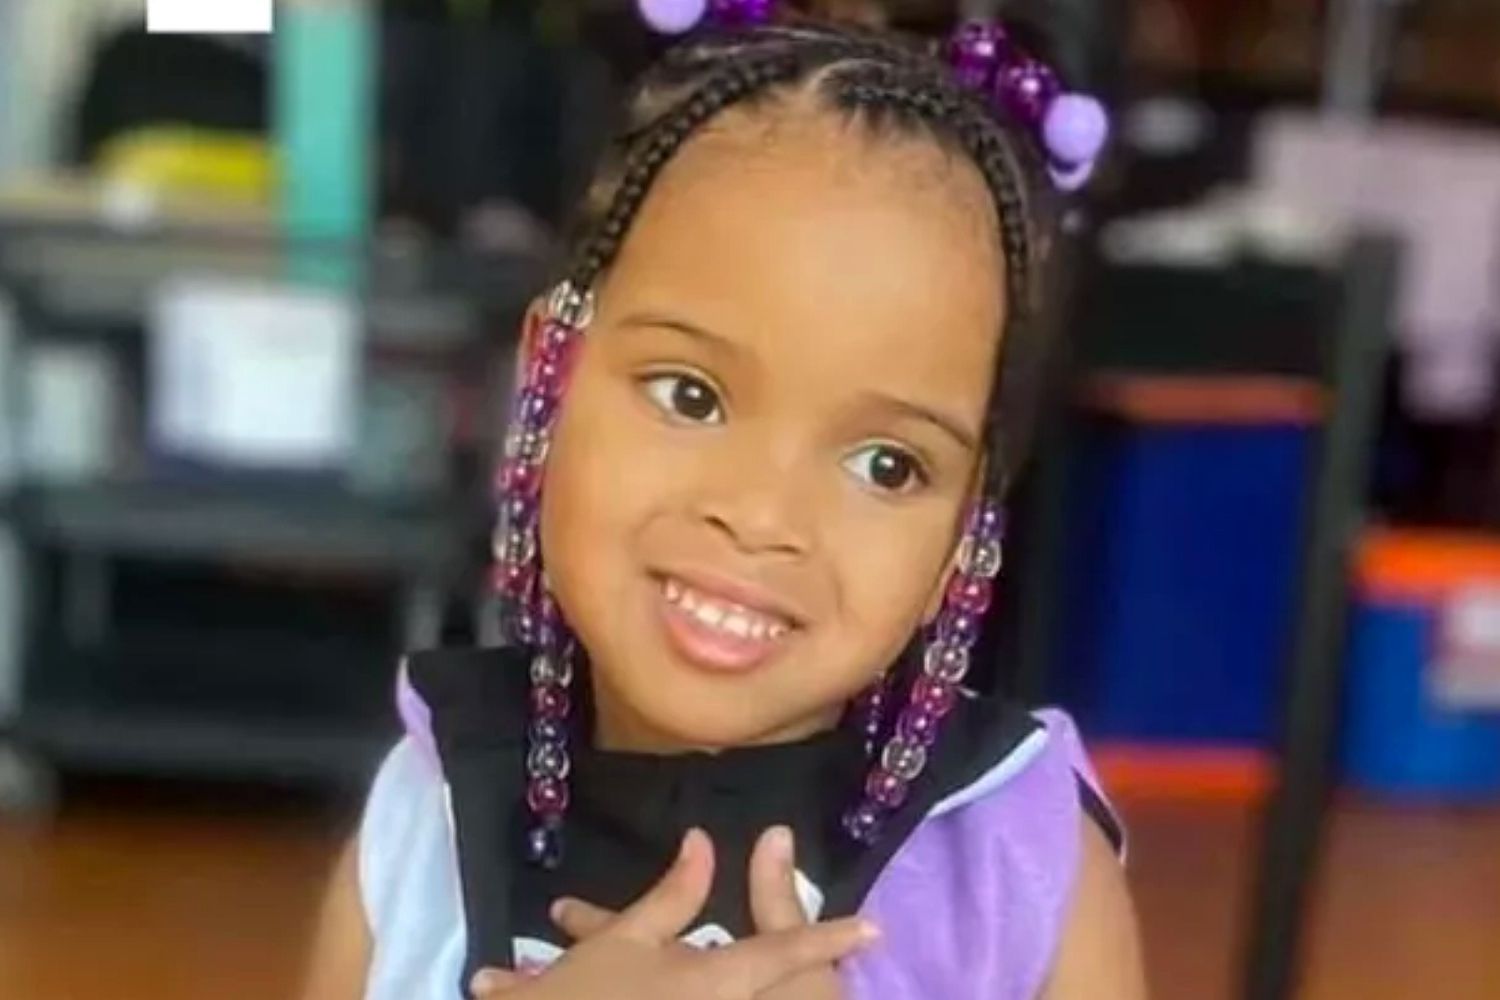 4-Year-Old Girl, Kaari Thompson, Shot to Death in Local Pennsylvania Grocery Store; Mother Remains in Critical Condition